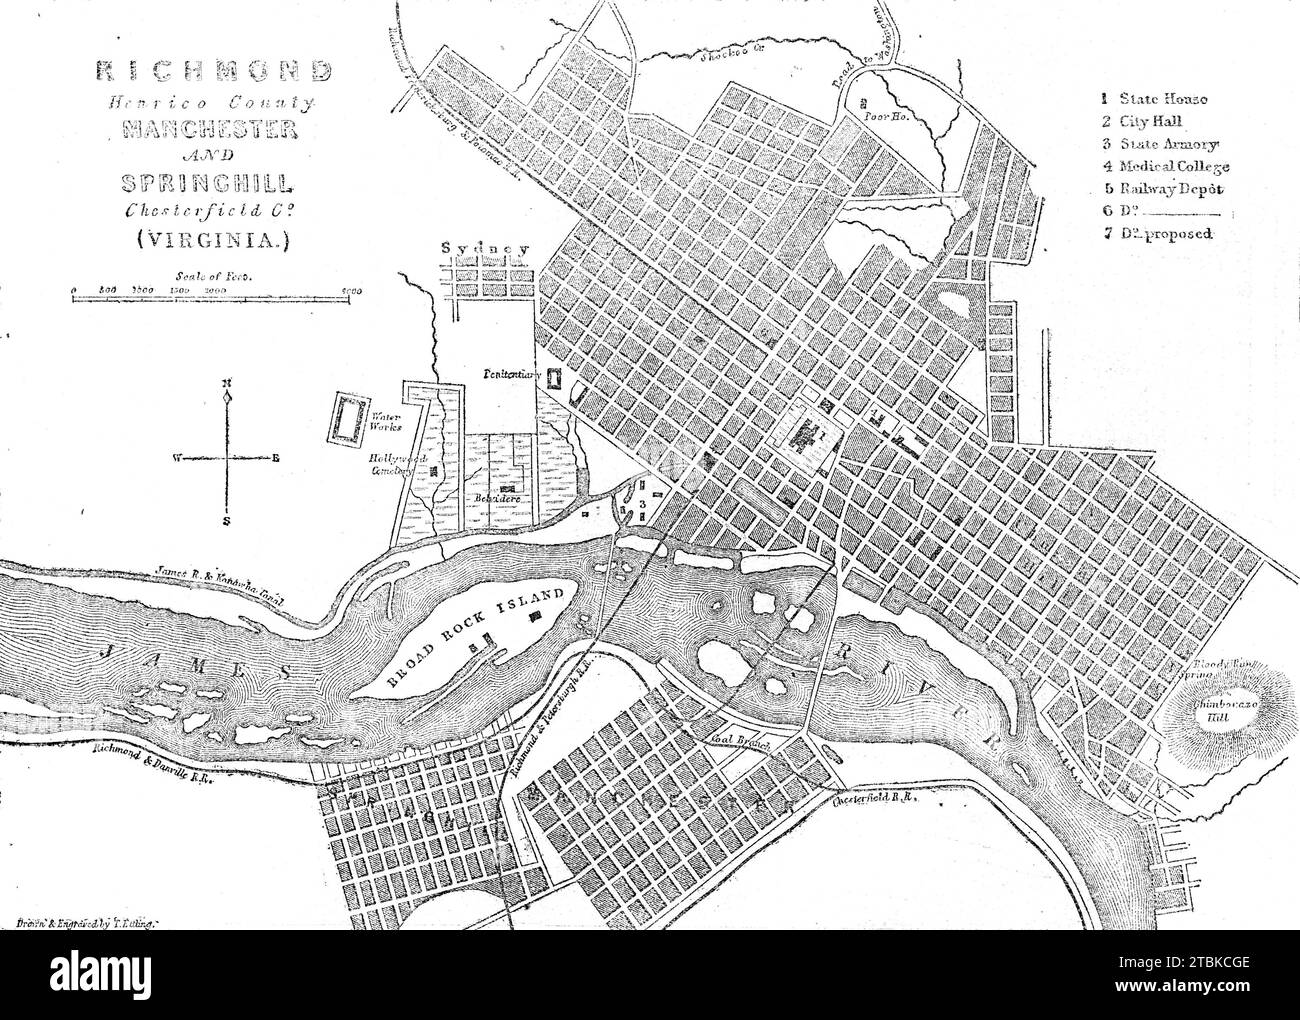 Richmond, Virginia, the capital of the Confederate States of America, 1861. American Civil War. Map showing the State House, City Hall, State Armory, Medical College, Railway Depot, Broad Rock Island, penitentiary, waterworks, Hollywood Cemetery, poor house, Chimborazo Hill and the James River. 'Richmond, Henrico County, Manchester and Springhill, Chesterfield Co., Virginia'. From &quot;Illustrated London News&quot;, 1861. Stock Photo